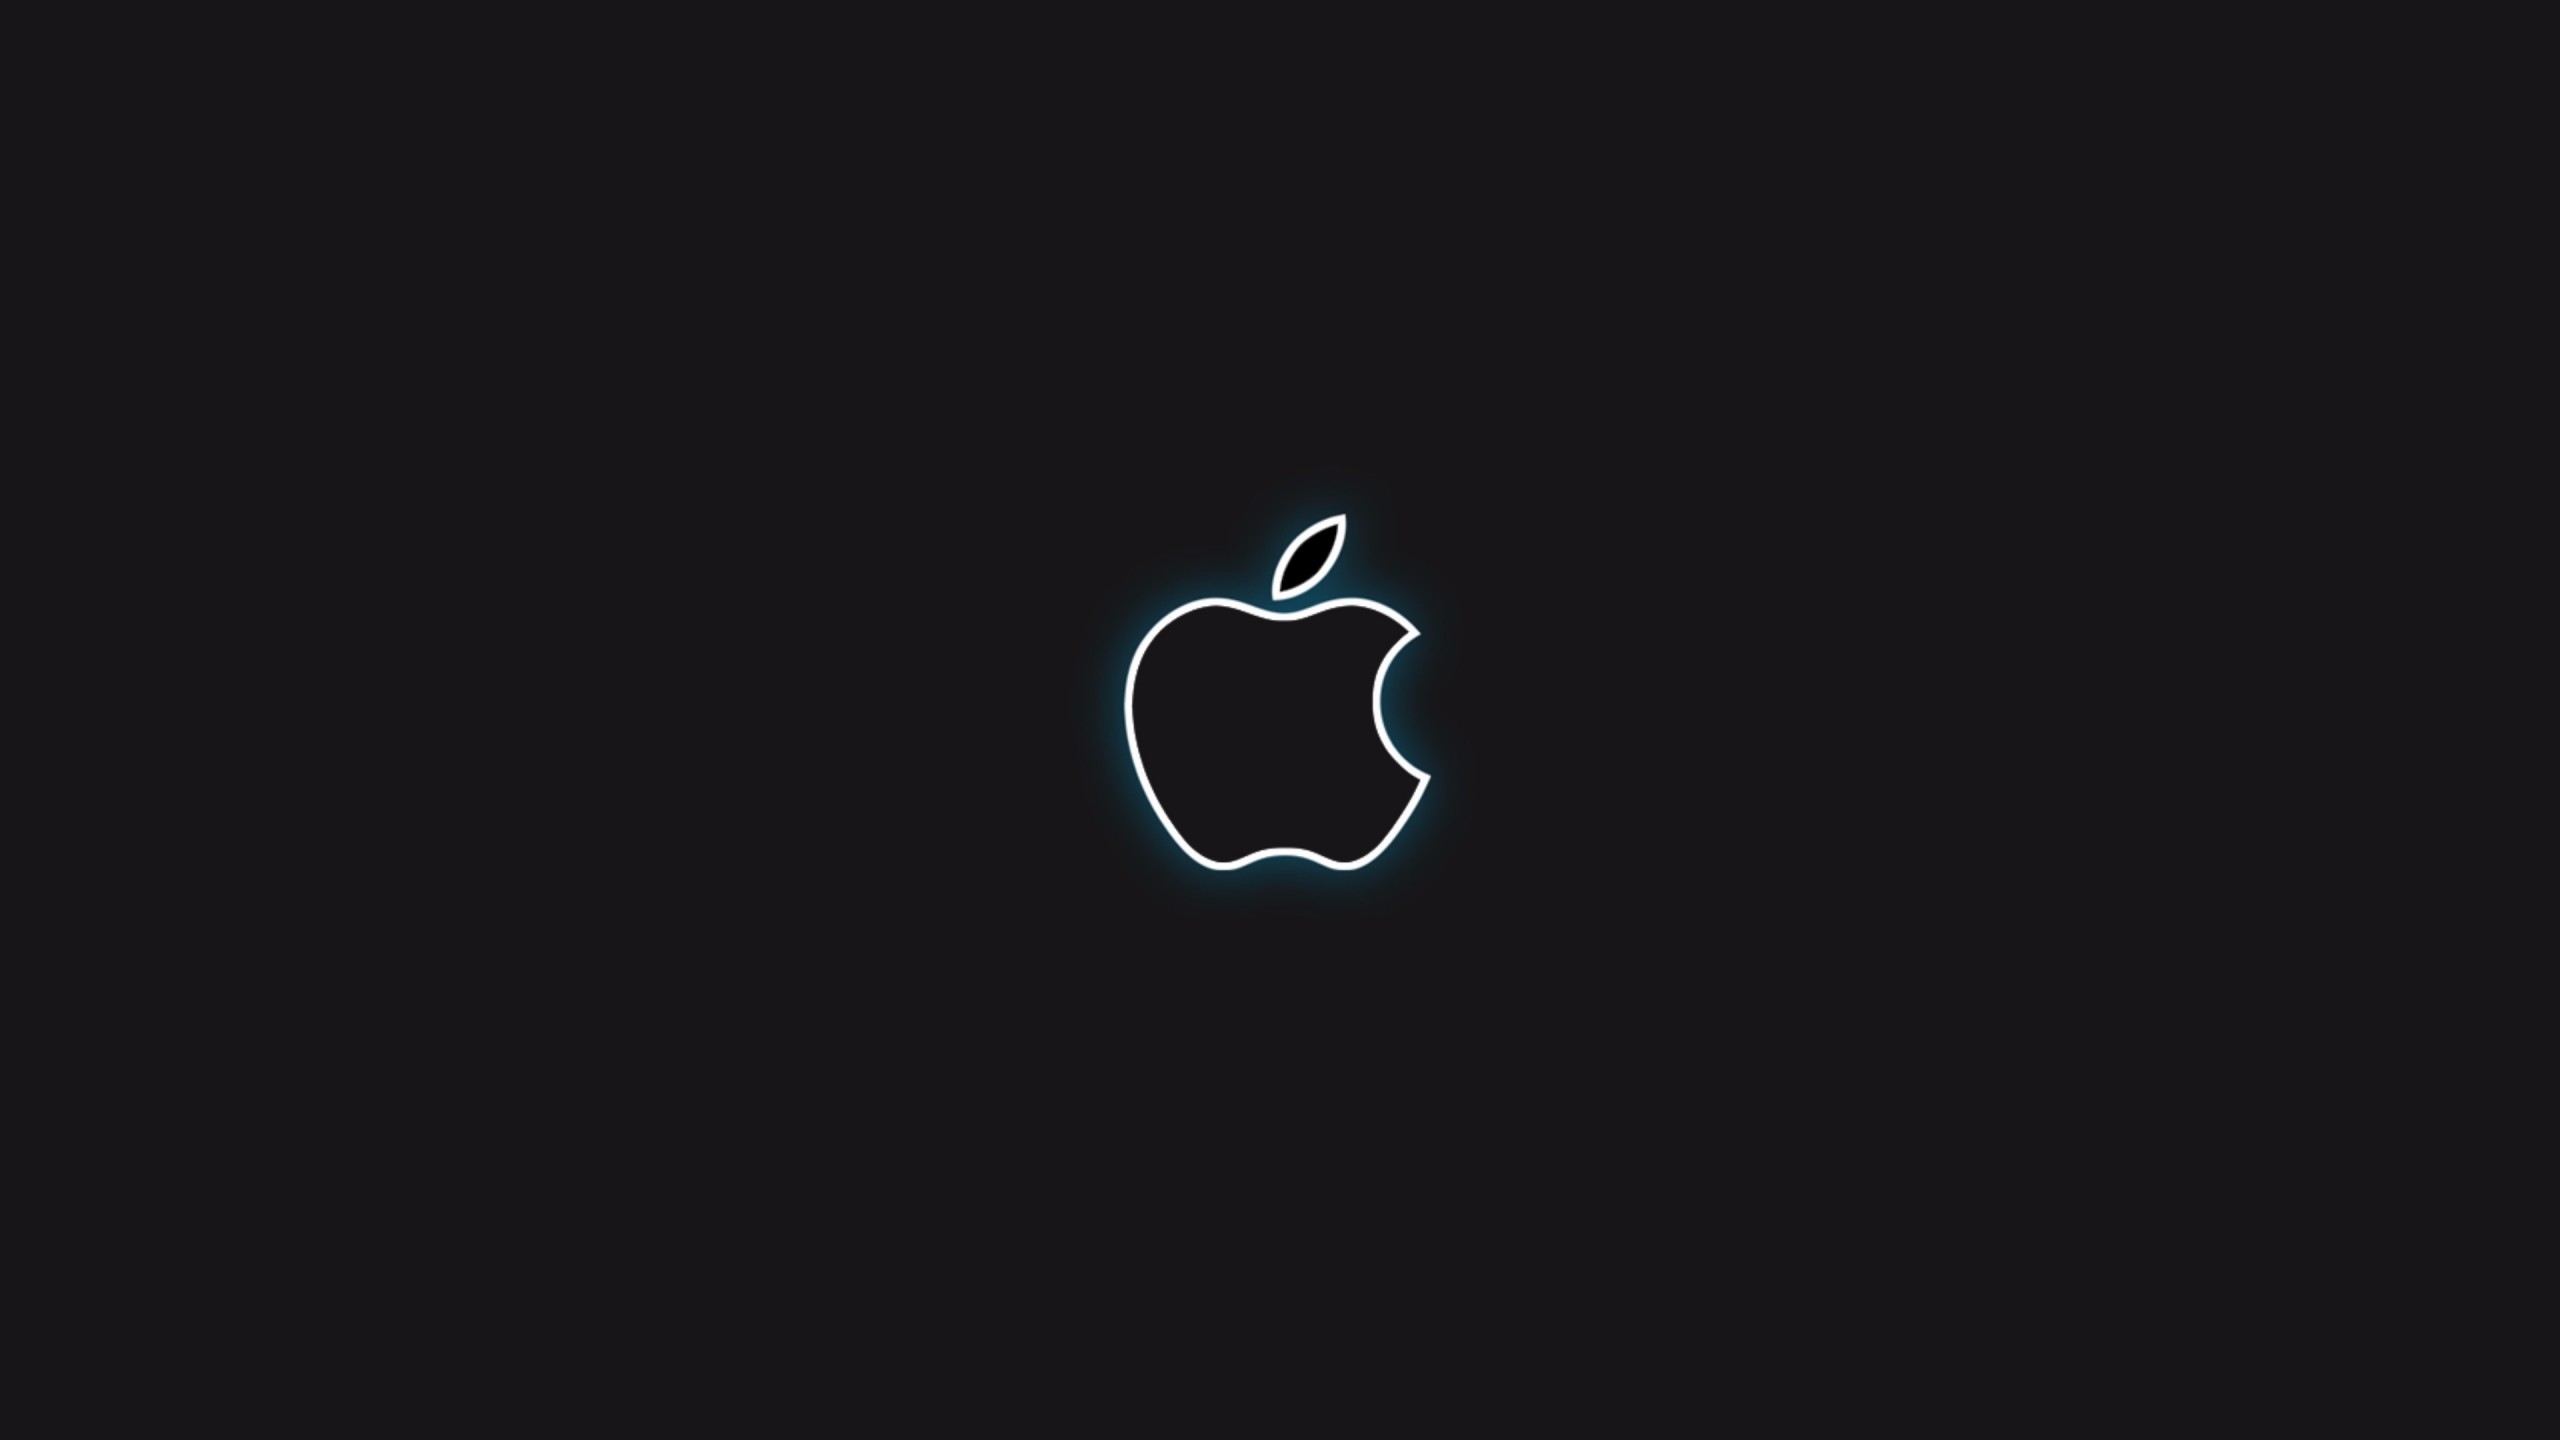 Amazing Hd 1080P Apple Logo Wallpaper 4K For Iphone Download